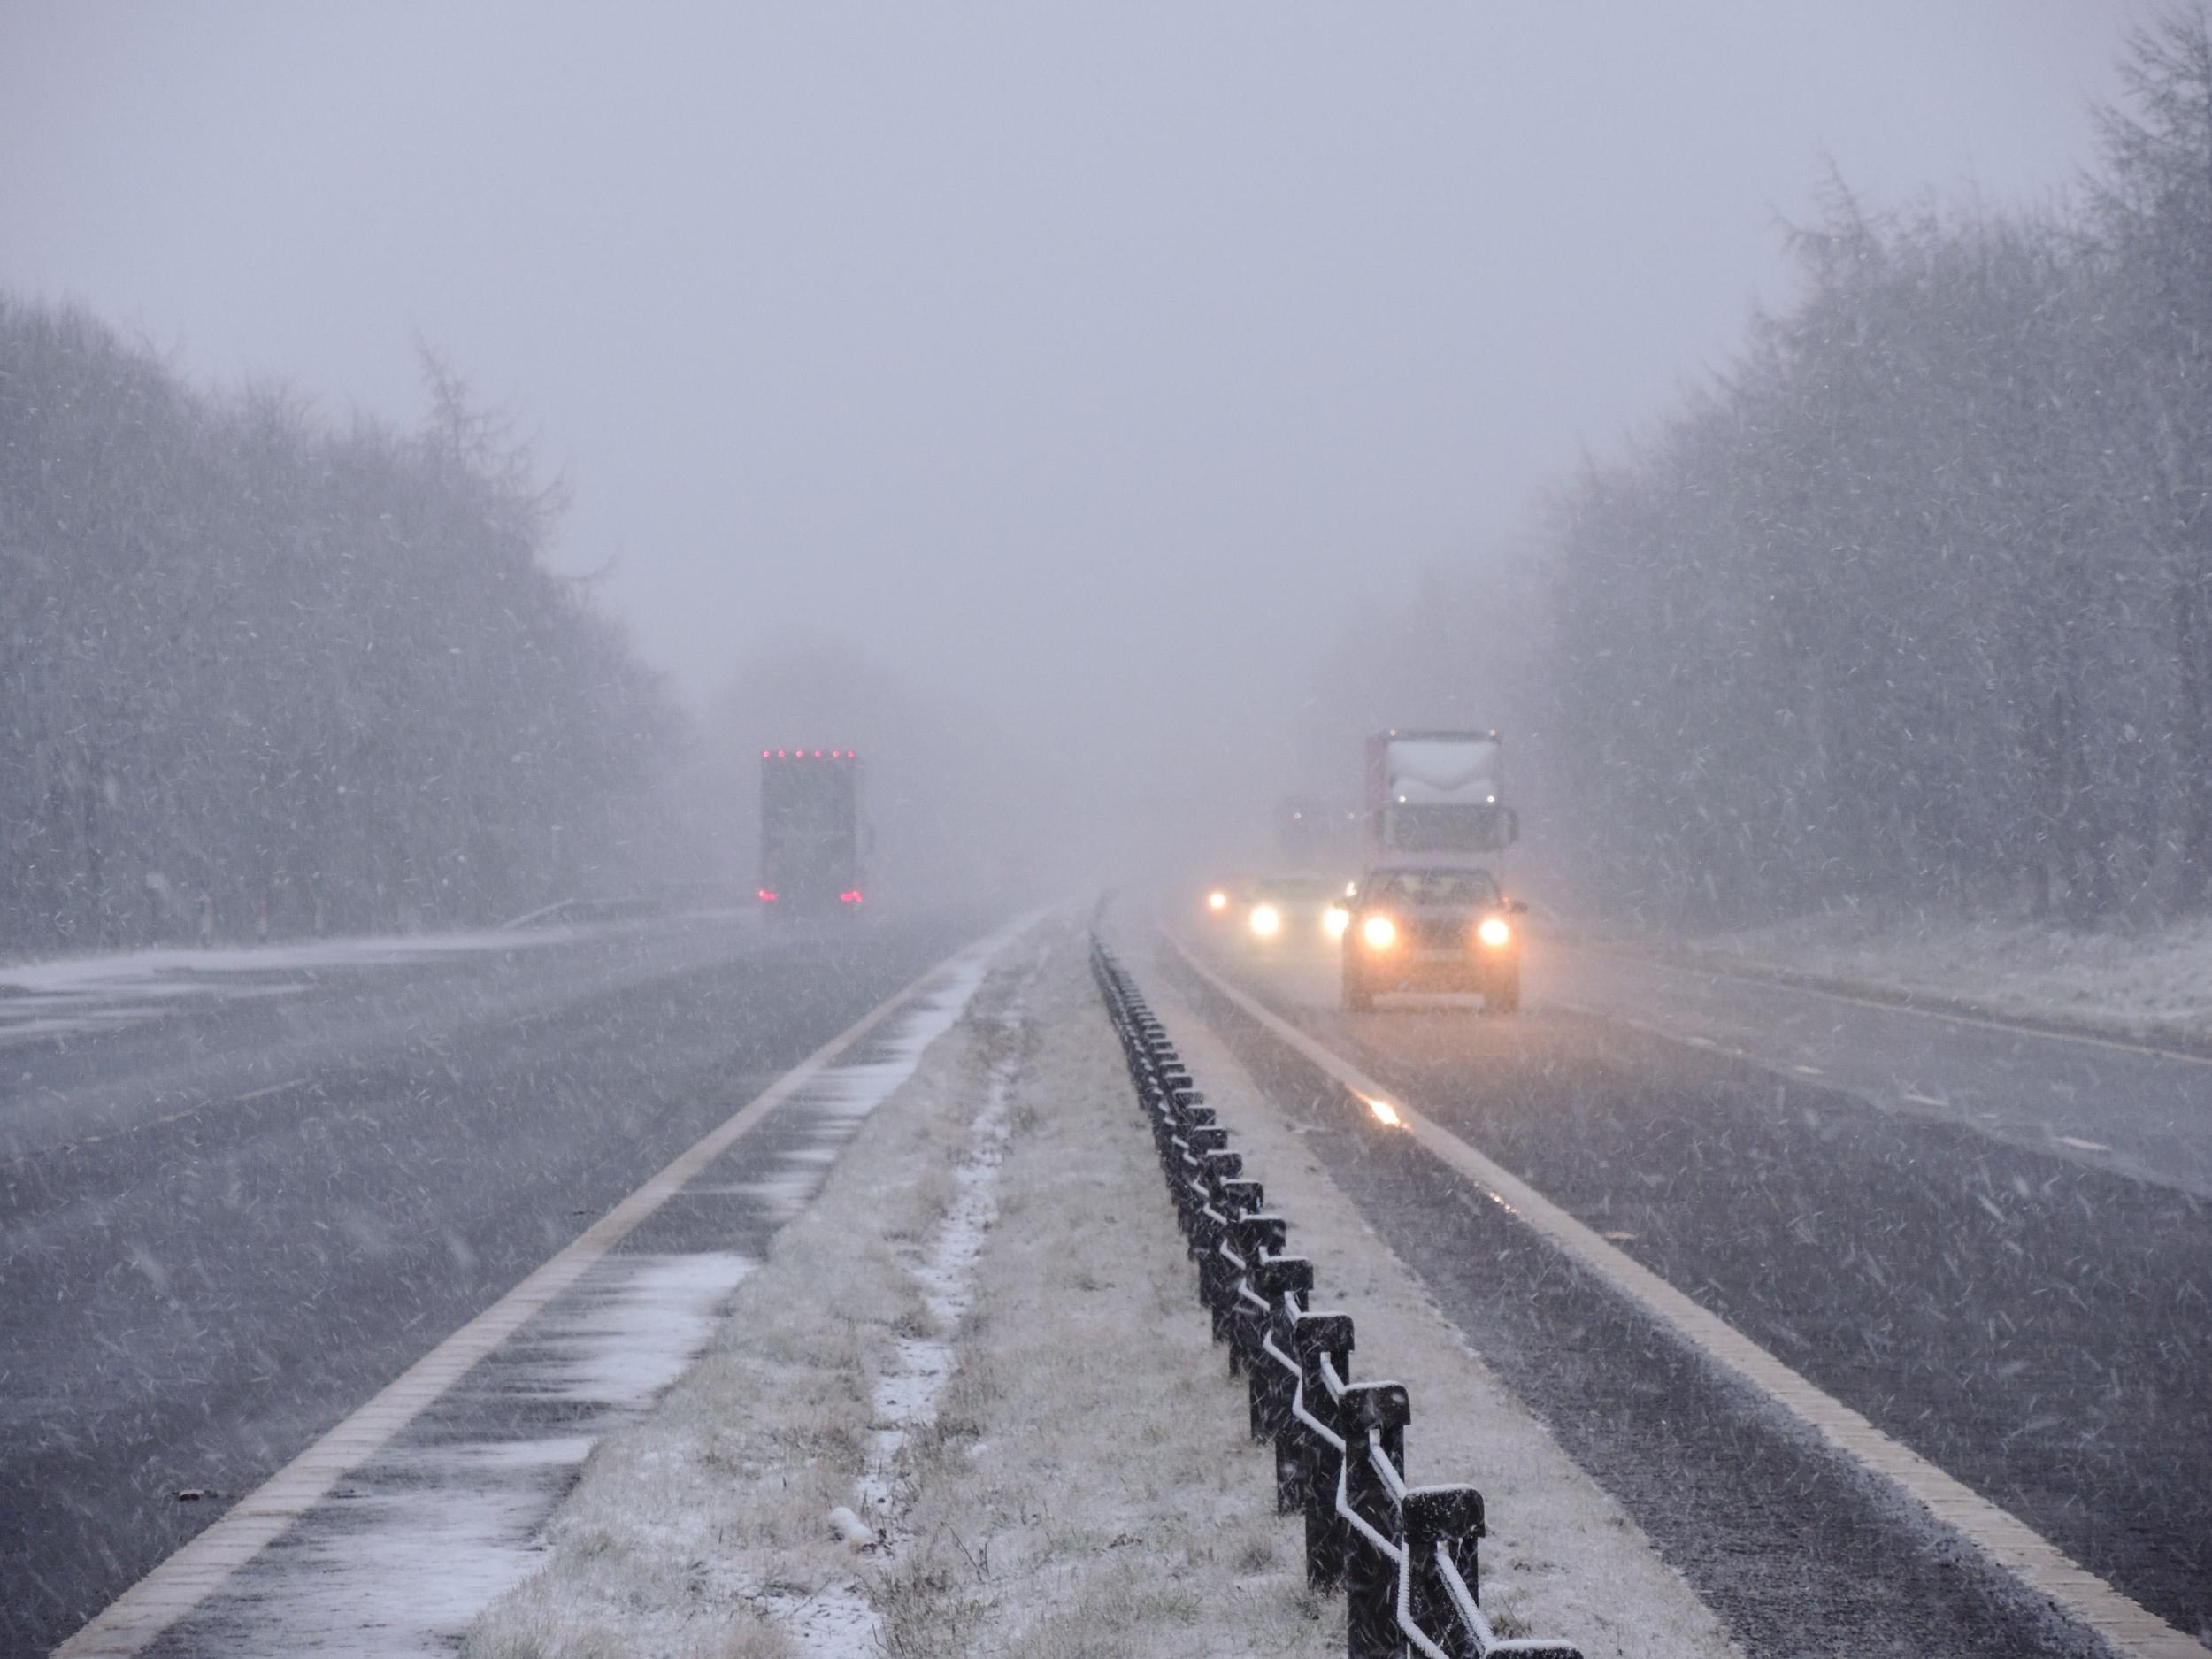 Drivers have been warned to take extra care on the roads as more snow sweeps in across the UK